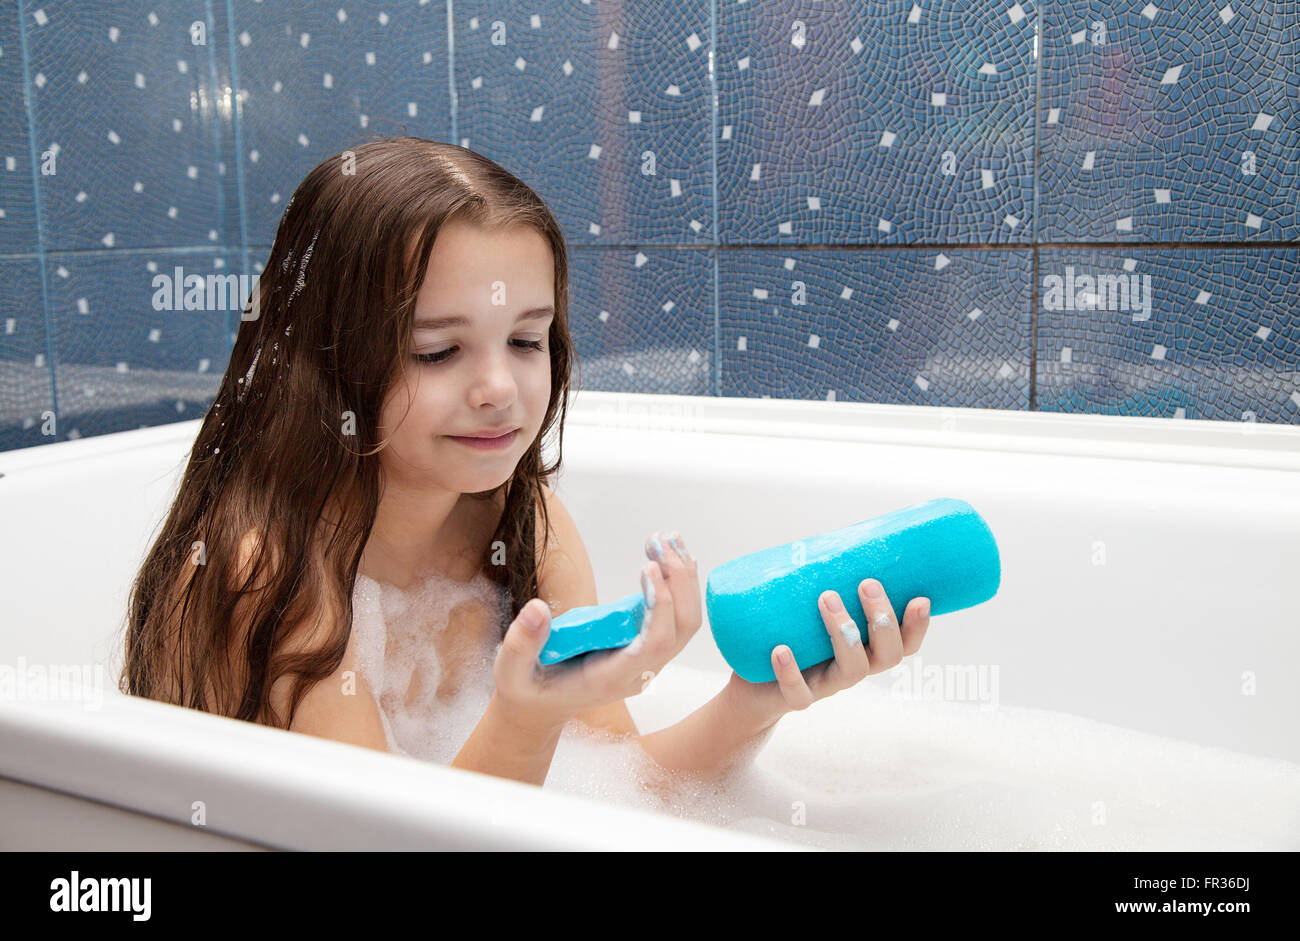 little smiling girl with long brown hair taking a bath with a blue ...